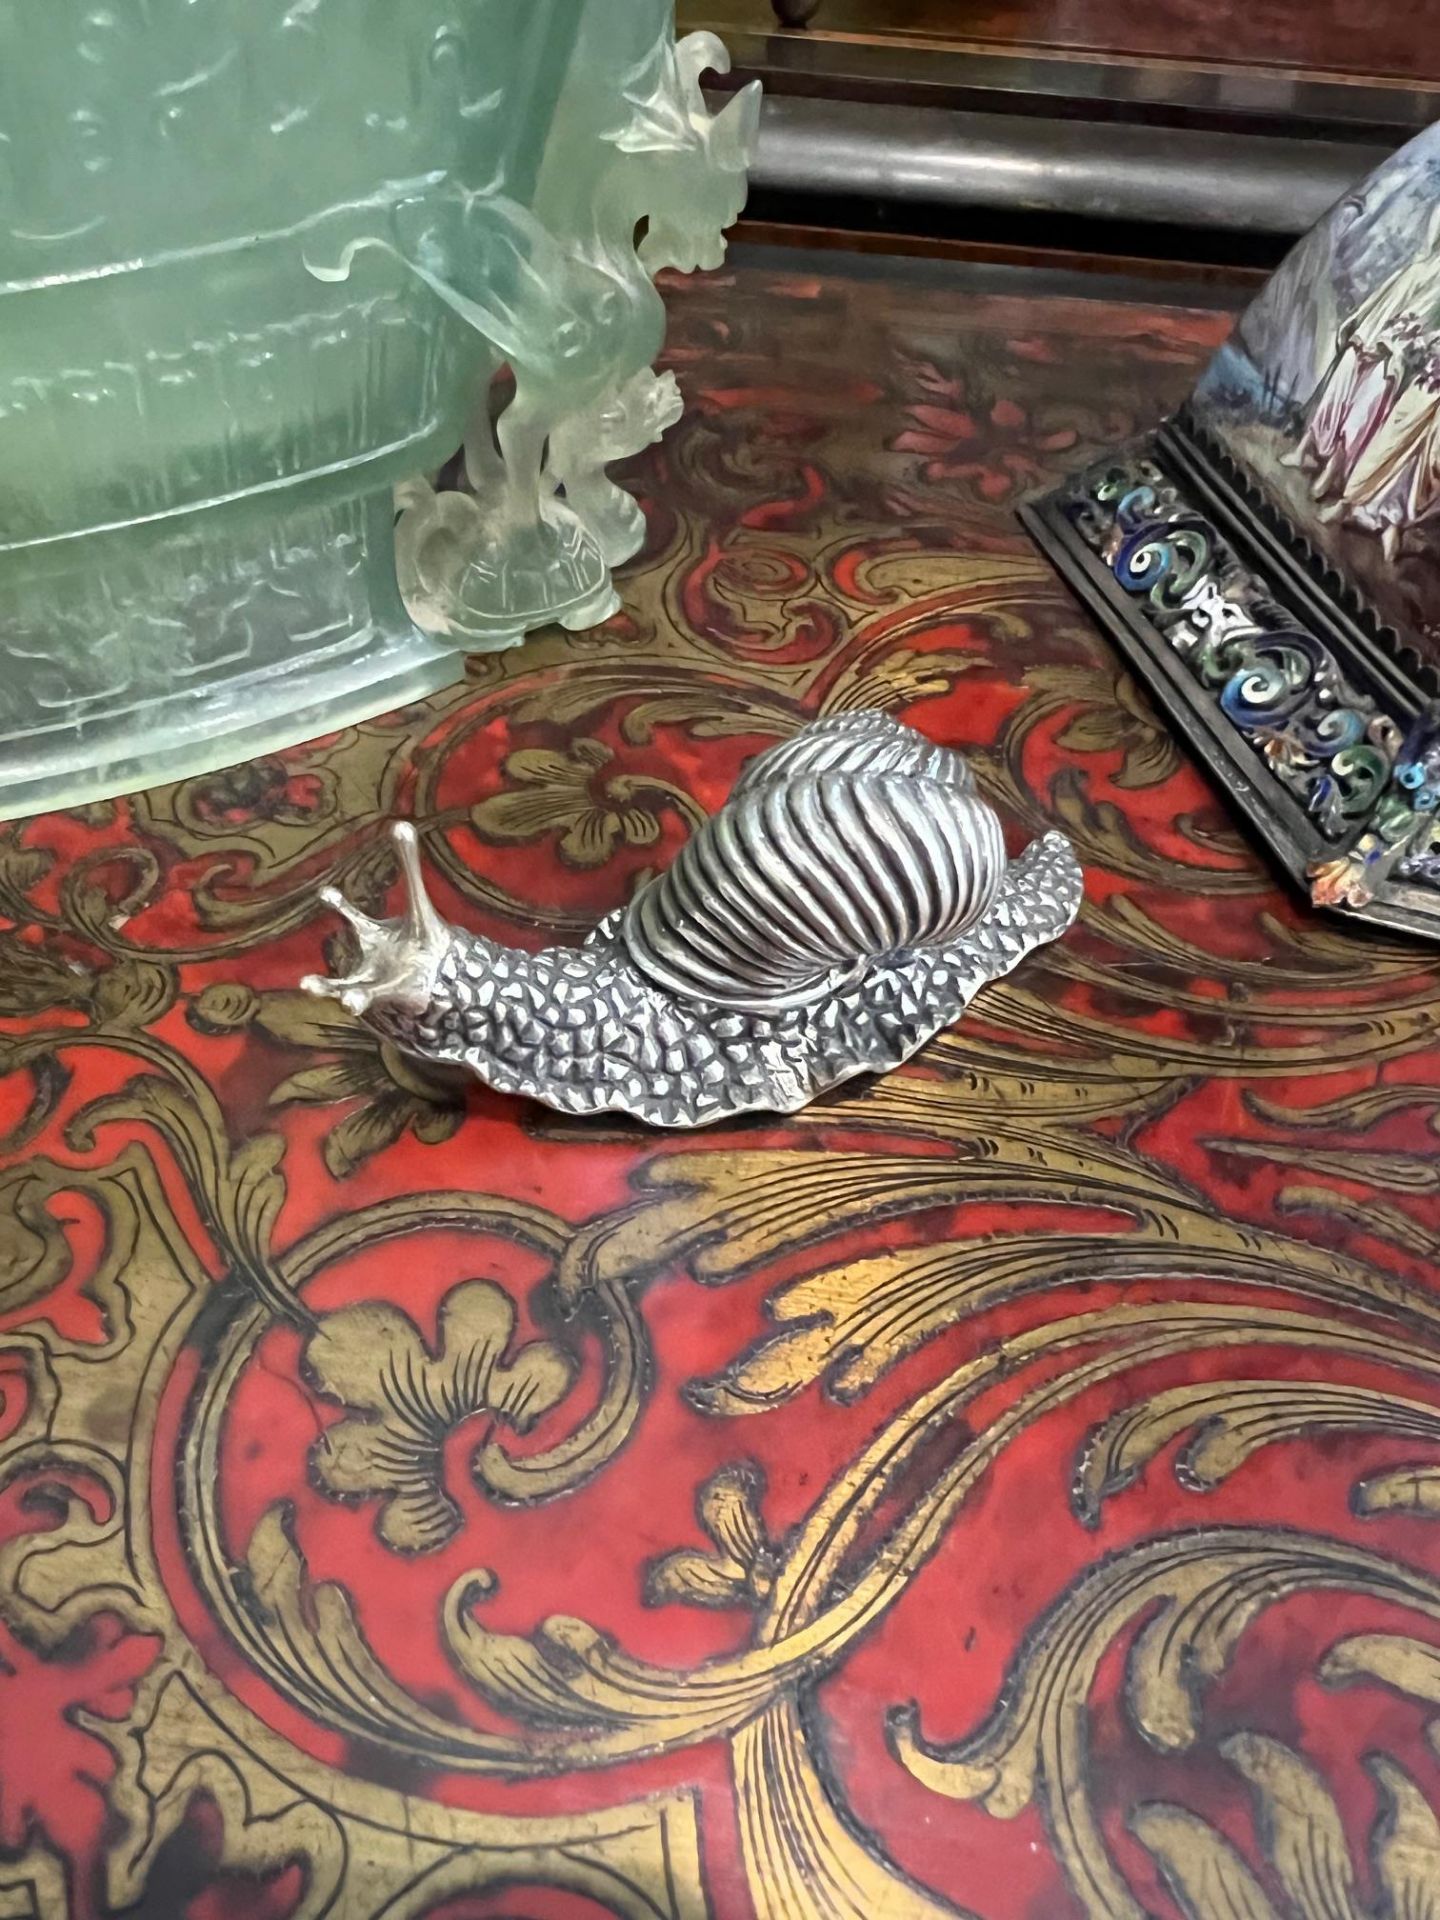 AN ITALIAN SILVER MODEL OF A SNAIL - Image 2 of 2